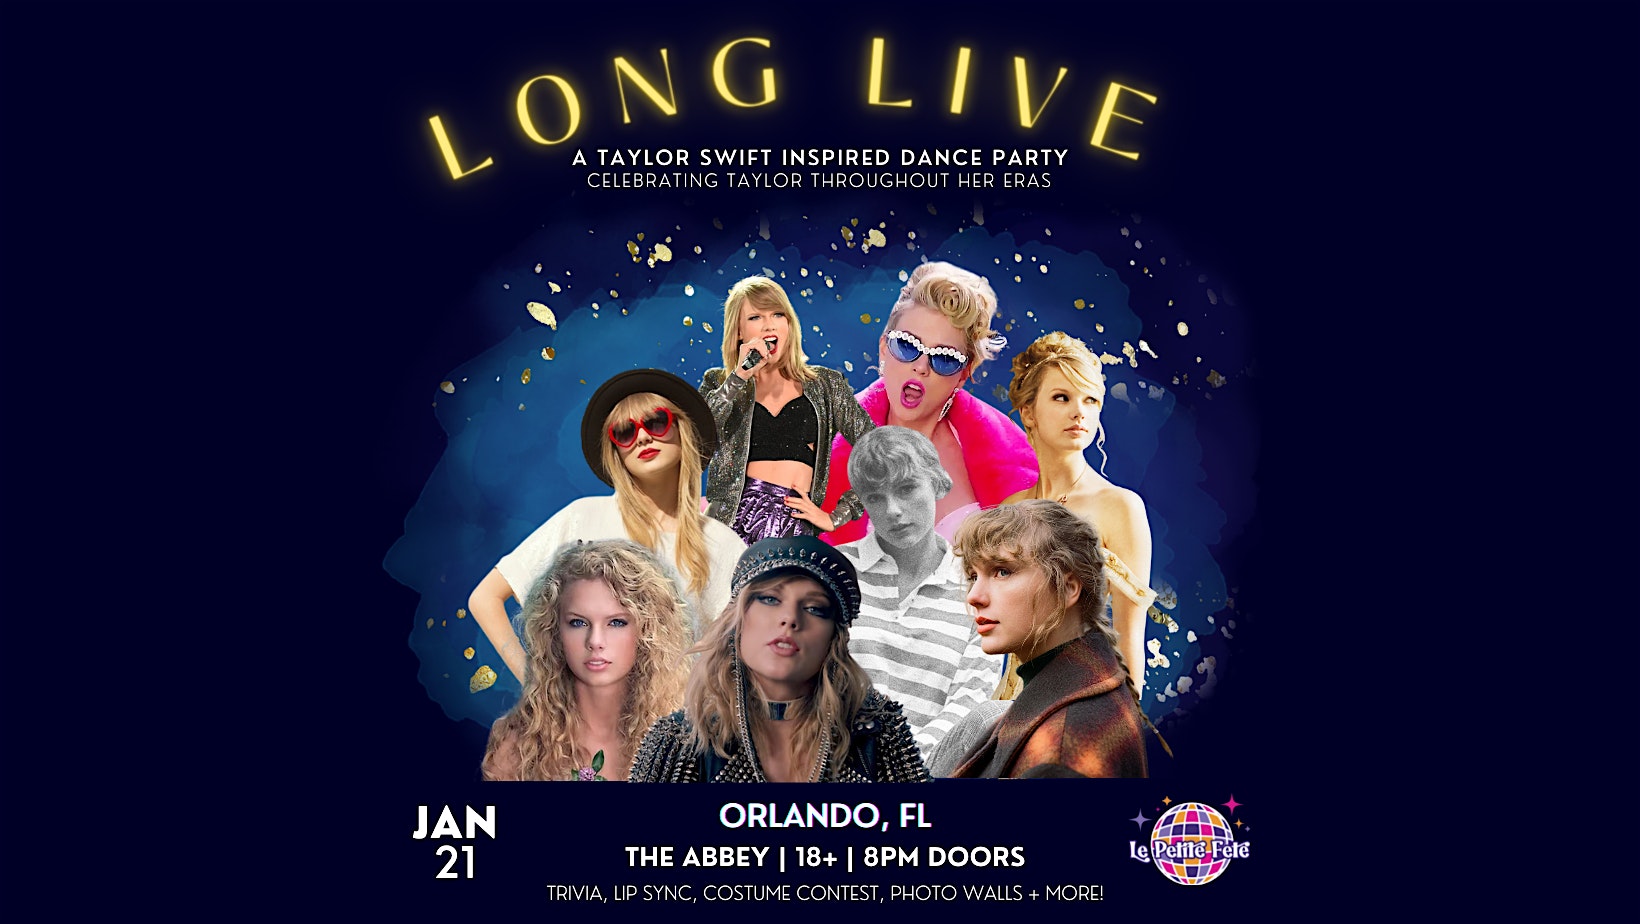 Long Live: A Taylor Swift Inspired Dance Party in Orlando at the Abbey